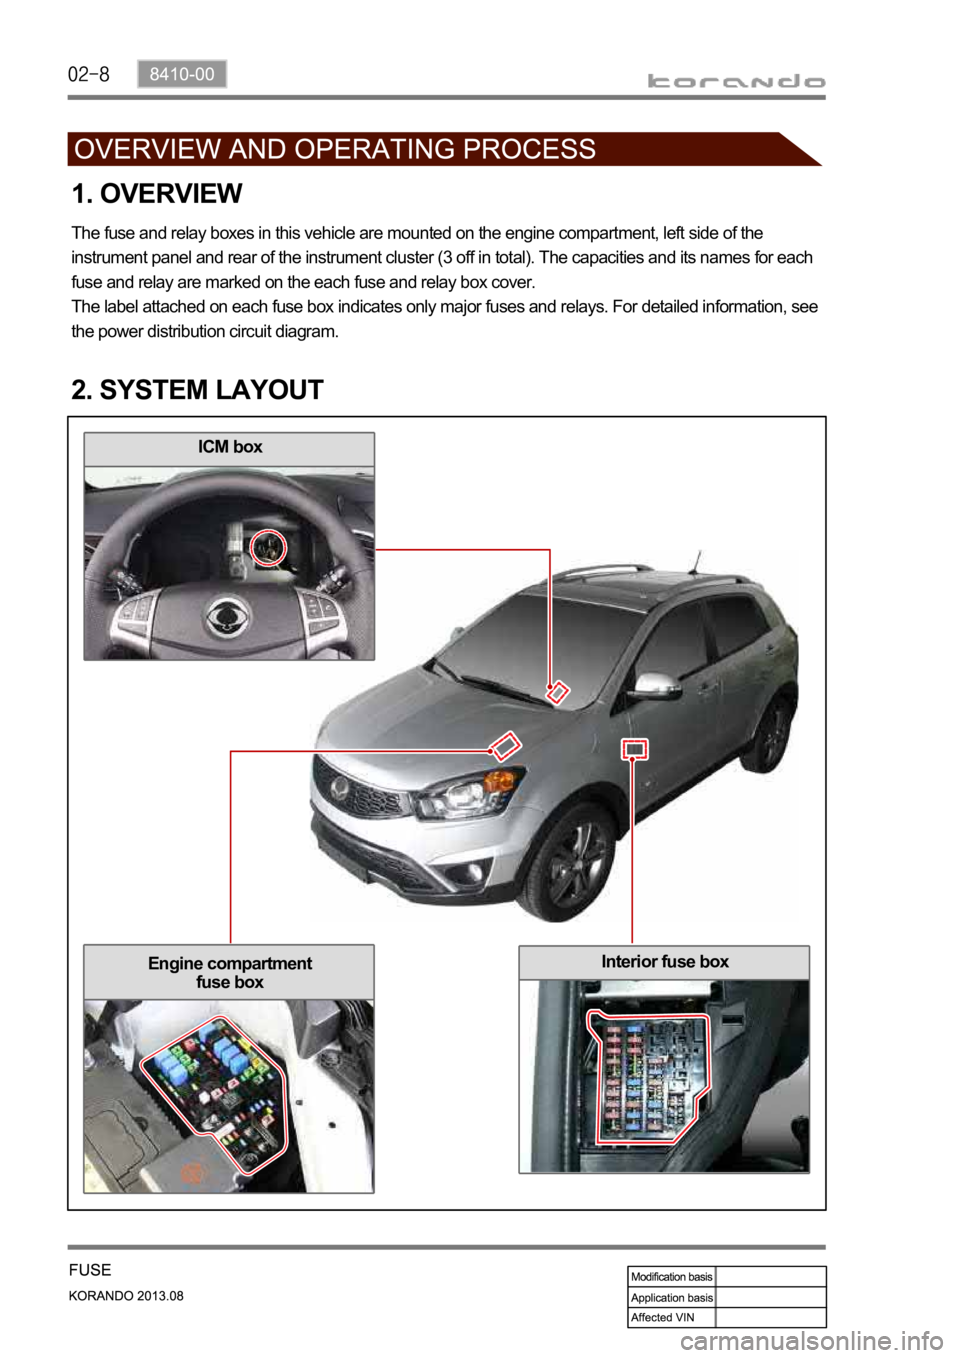 SSANGYONG KORANDO 2013  Service Manual ICM box
Interior fuse boxEngine compartment 
fuse box
The fuse and relay boxes in this vehicle are mounted on the engine compartment, left side of the 
instrument panel and rear of the instrument clus